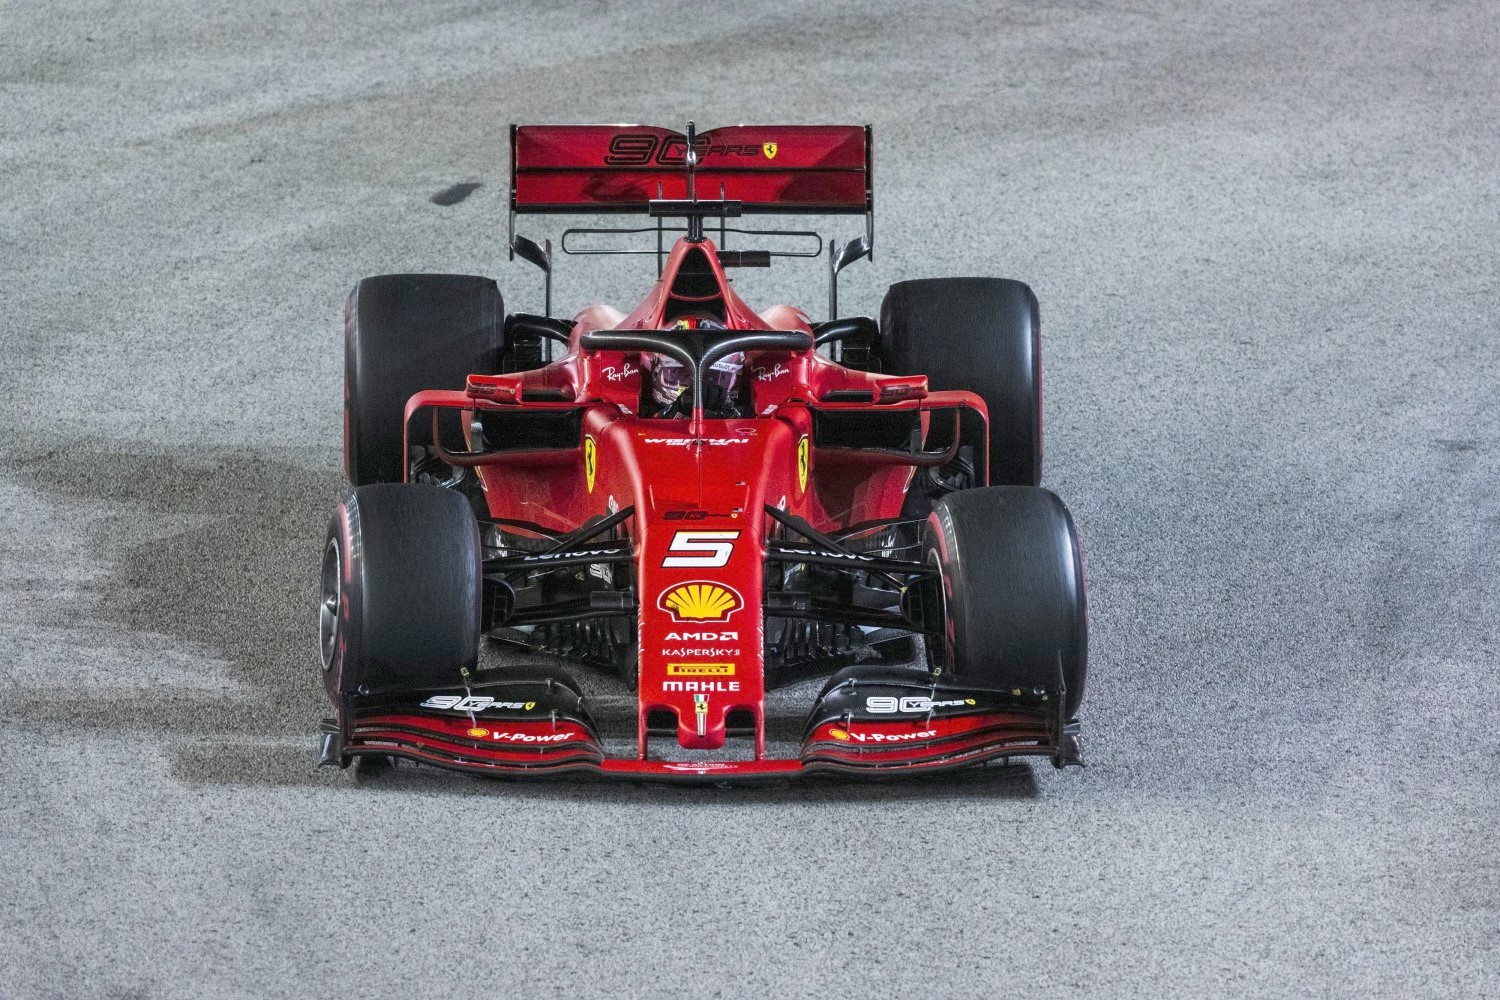 Vettel won his first race of 2019